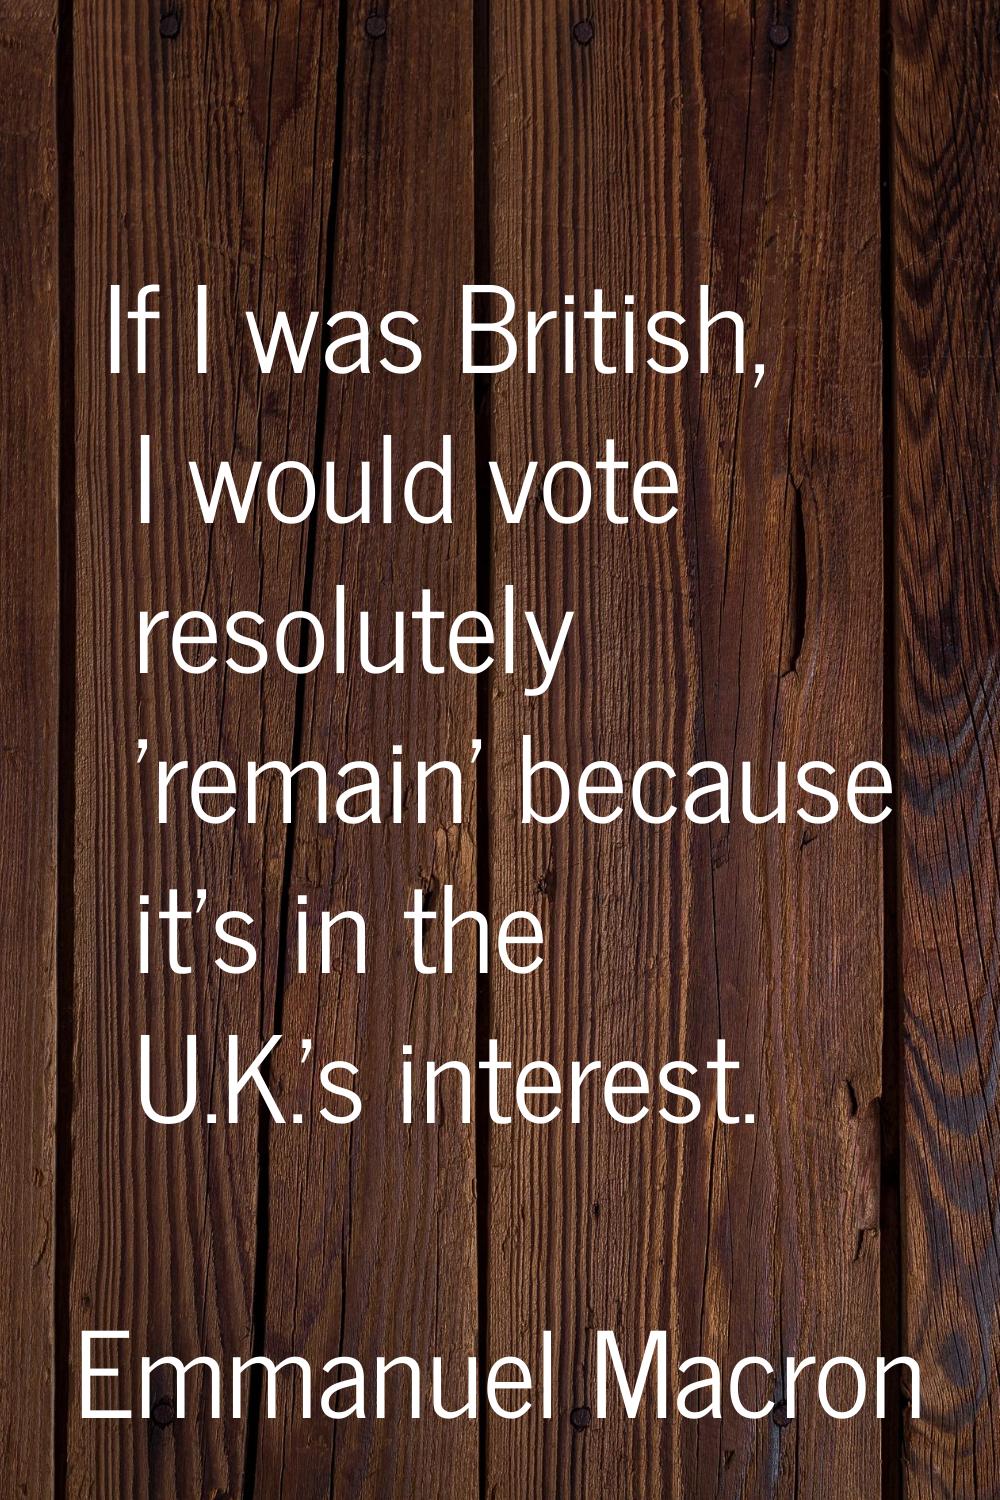 If I was British, I would vote resolutely 'remain' because it's in the U.K.'s interest.